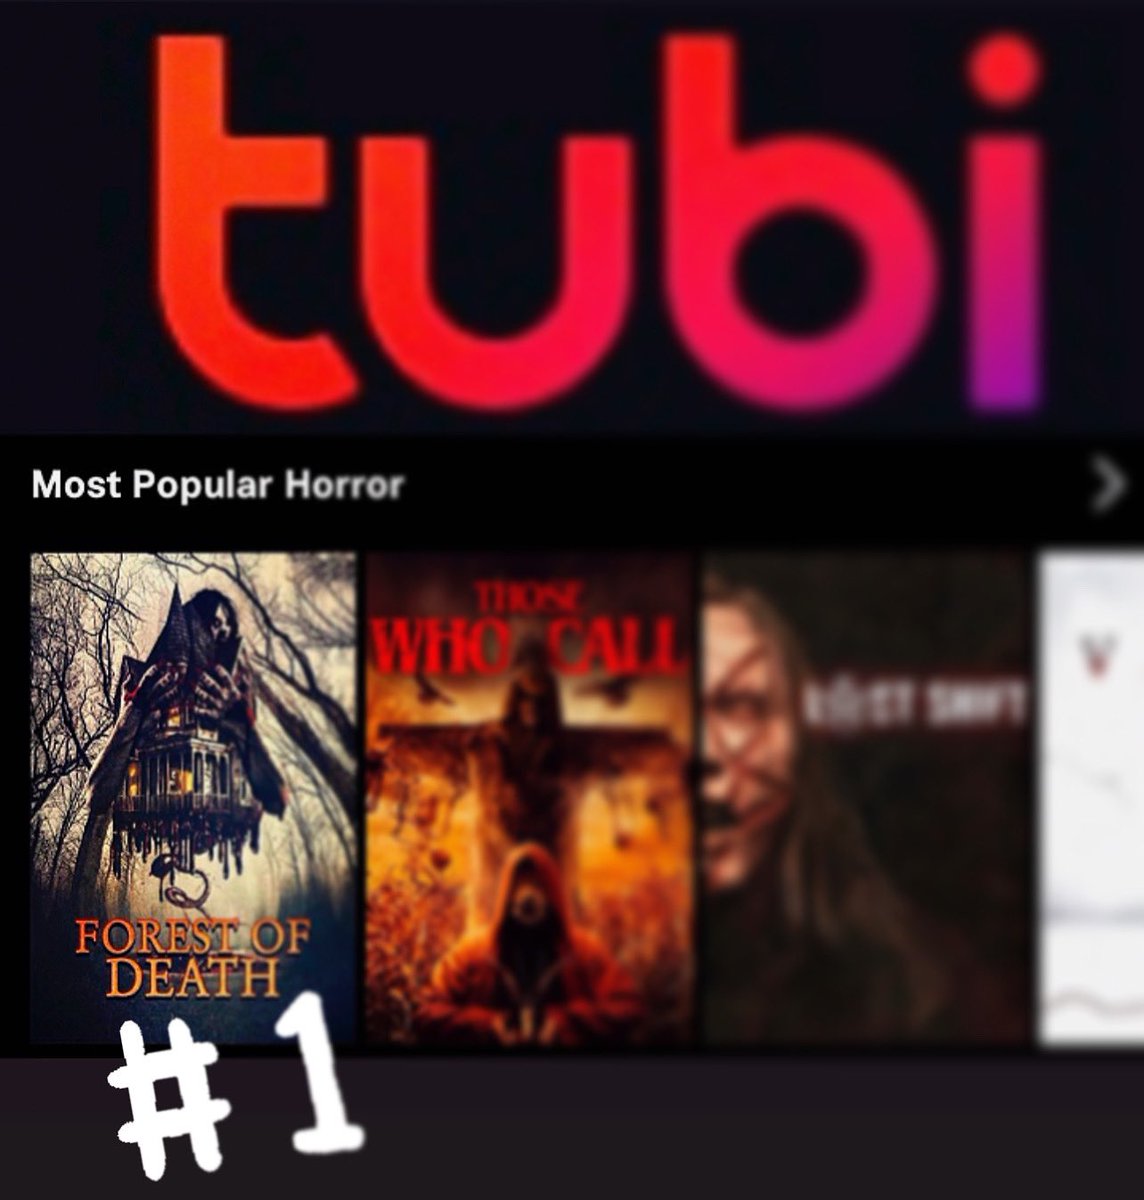 No big deal, just the #1 Most Popular Horror film on @Tubi  from @Dbs_Films 
#HorrorMovies #HorrorCommunity #tubi #scarymovies #NowStreaming #Roger